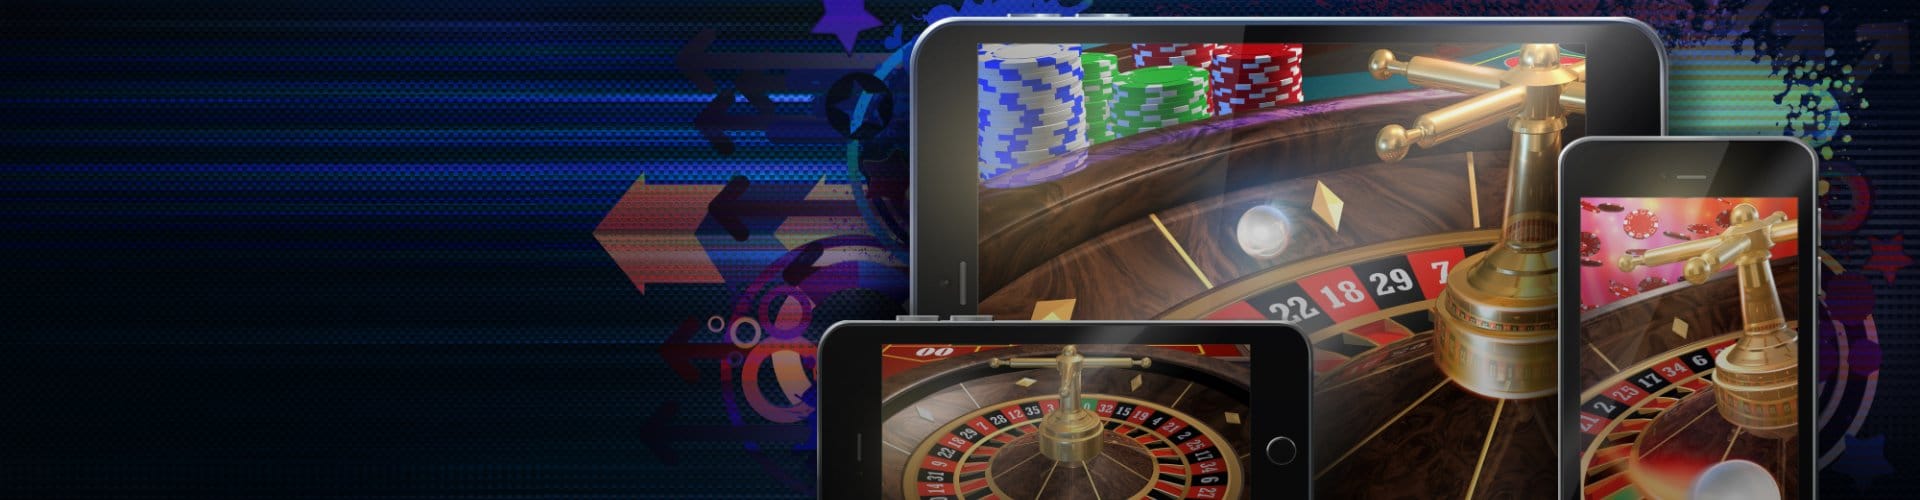 Yggdrasil Gaming Software Review – The Most Innovative Provider In The Slot Industry